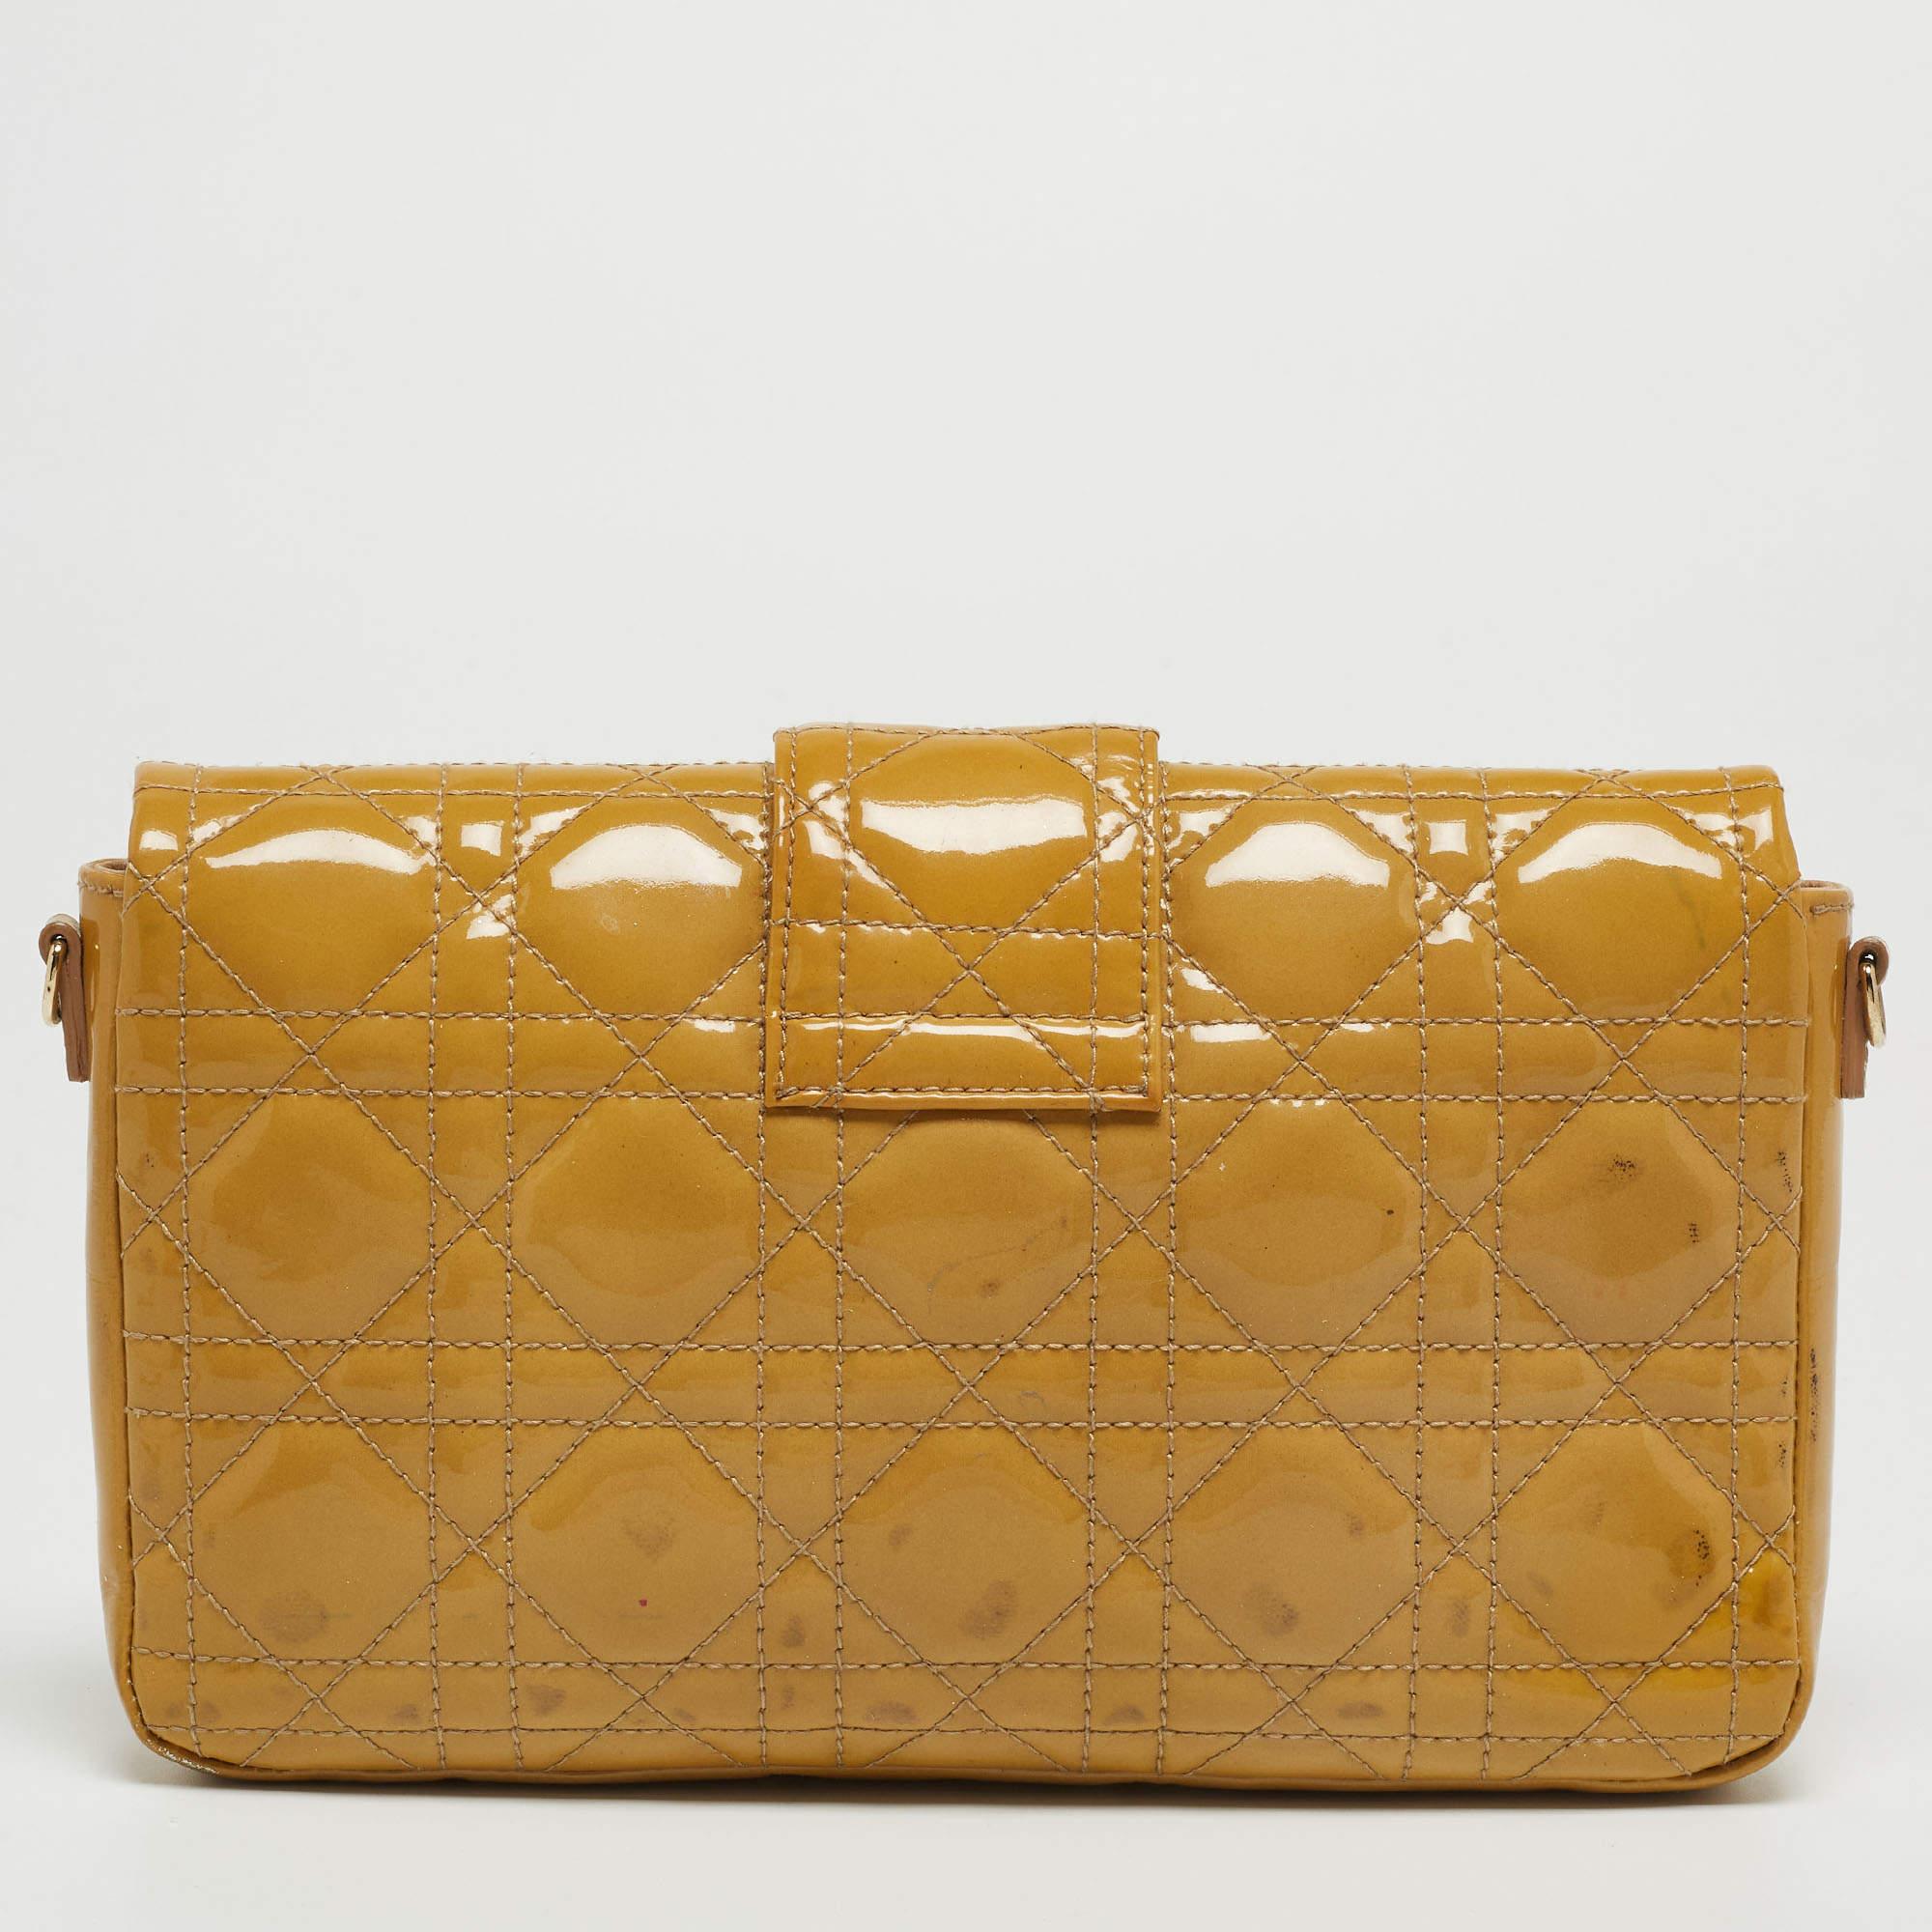 Enriched with striking elements, the appeal of this Prada Promenade clutch is truly ever-lasting. The leather interior of this yellow creation has ideal space to accommodate your valuables. Crafted from Cannage patent leather, it gets a recognizable